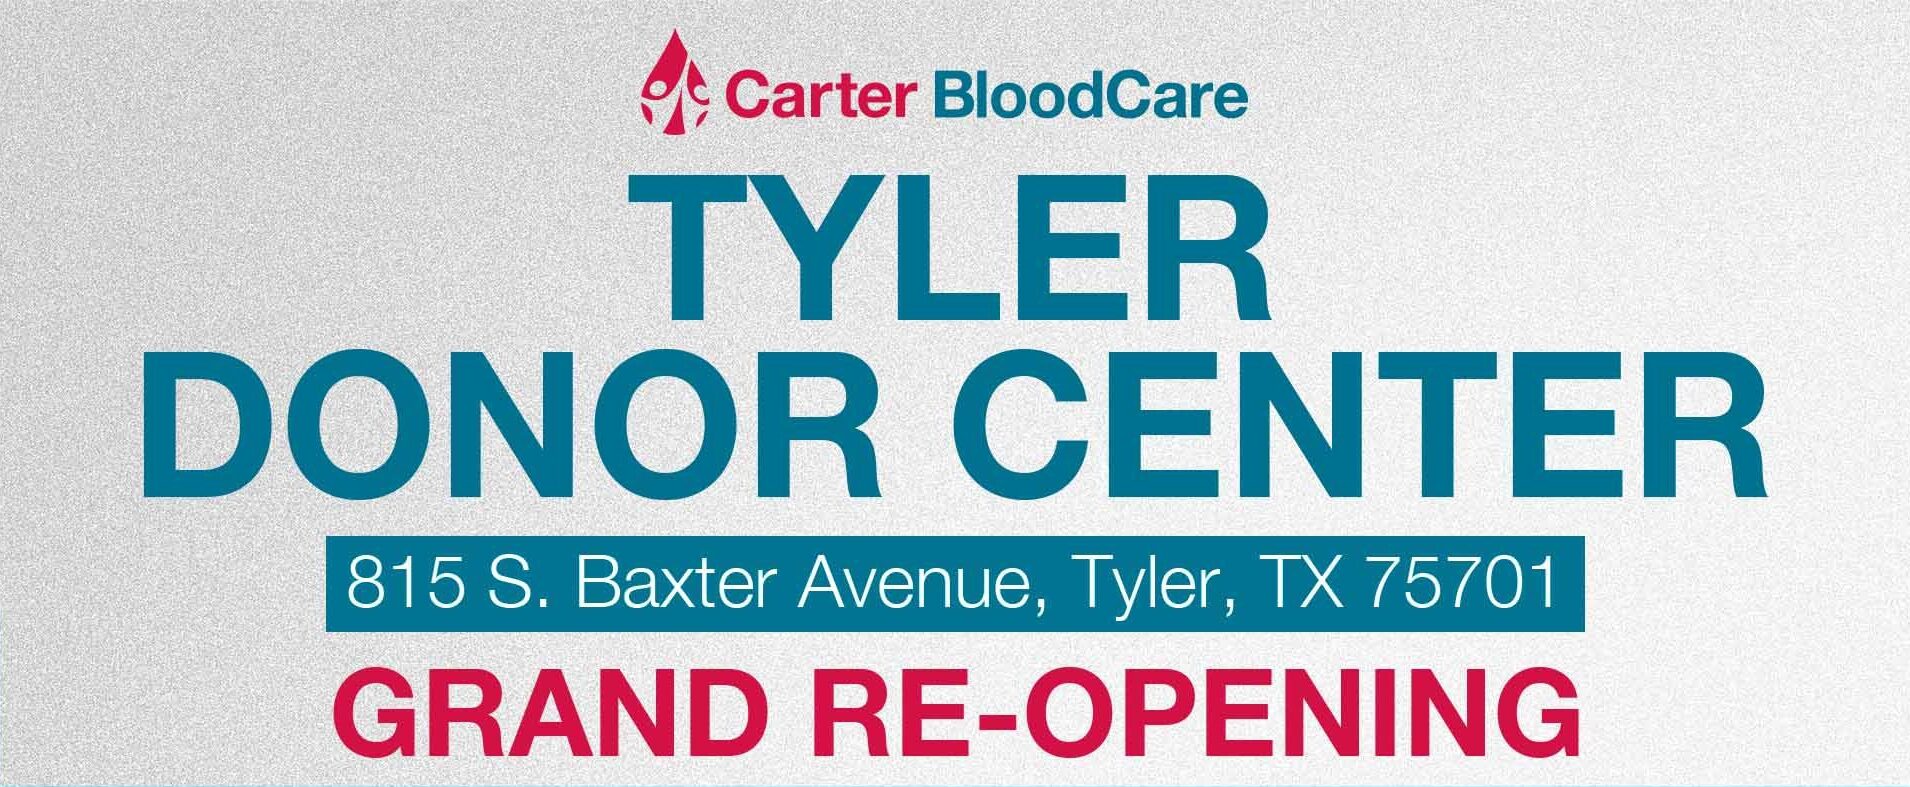 Carter BloodCare Donor Center in Tyler wraps remodel with ribbon-cutting ceremony and facility tour Nov. 14